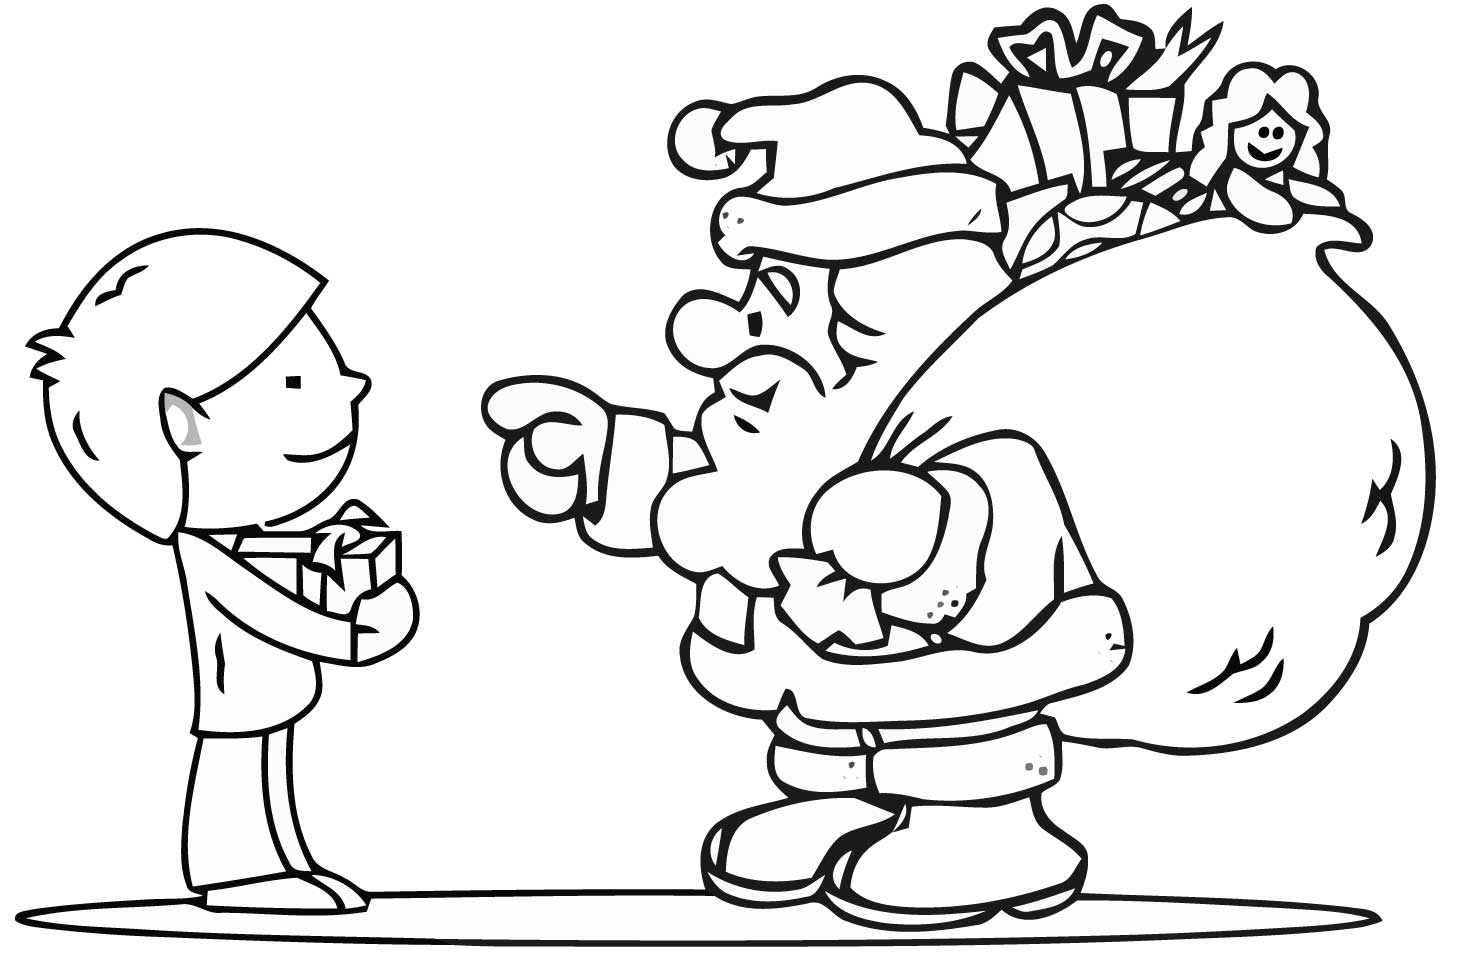 Free Christmas Colouring Pages For Children | Kids Online World Blog